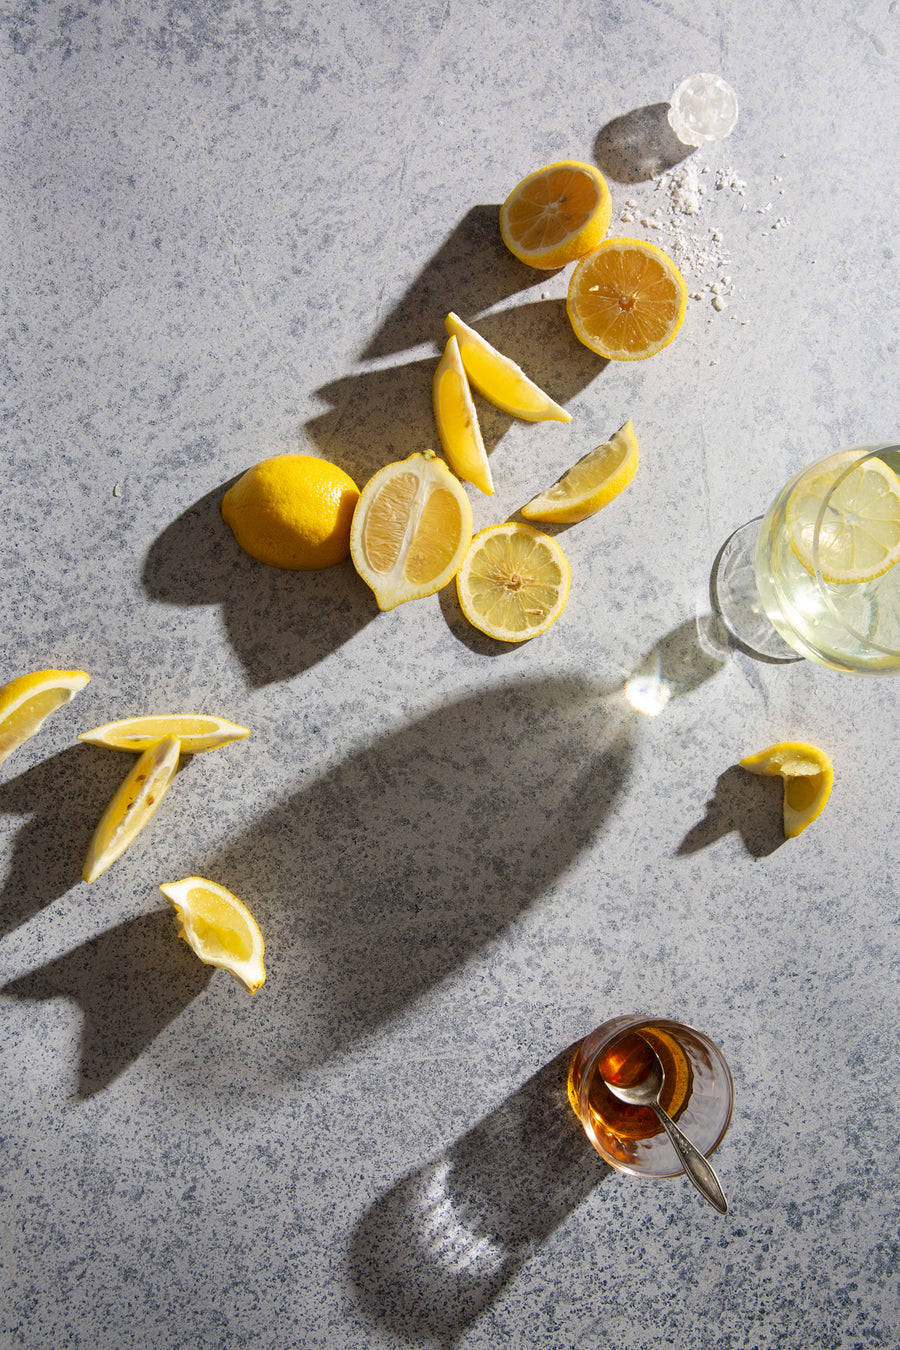 Beck Food Photography Background with sliced lemons